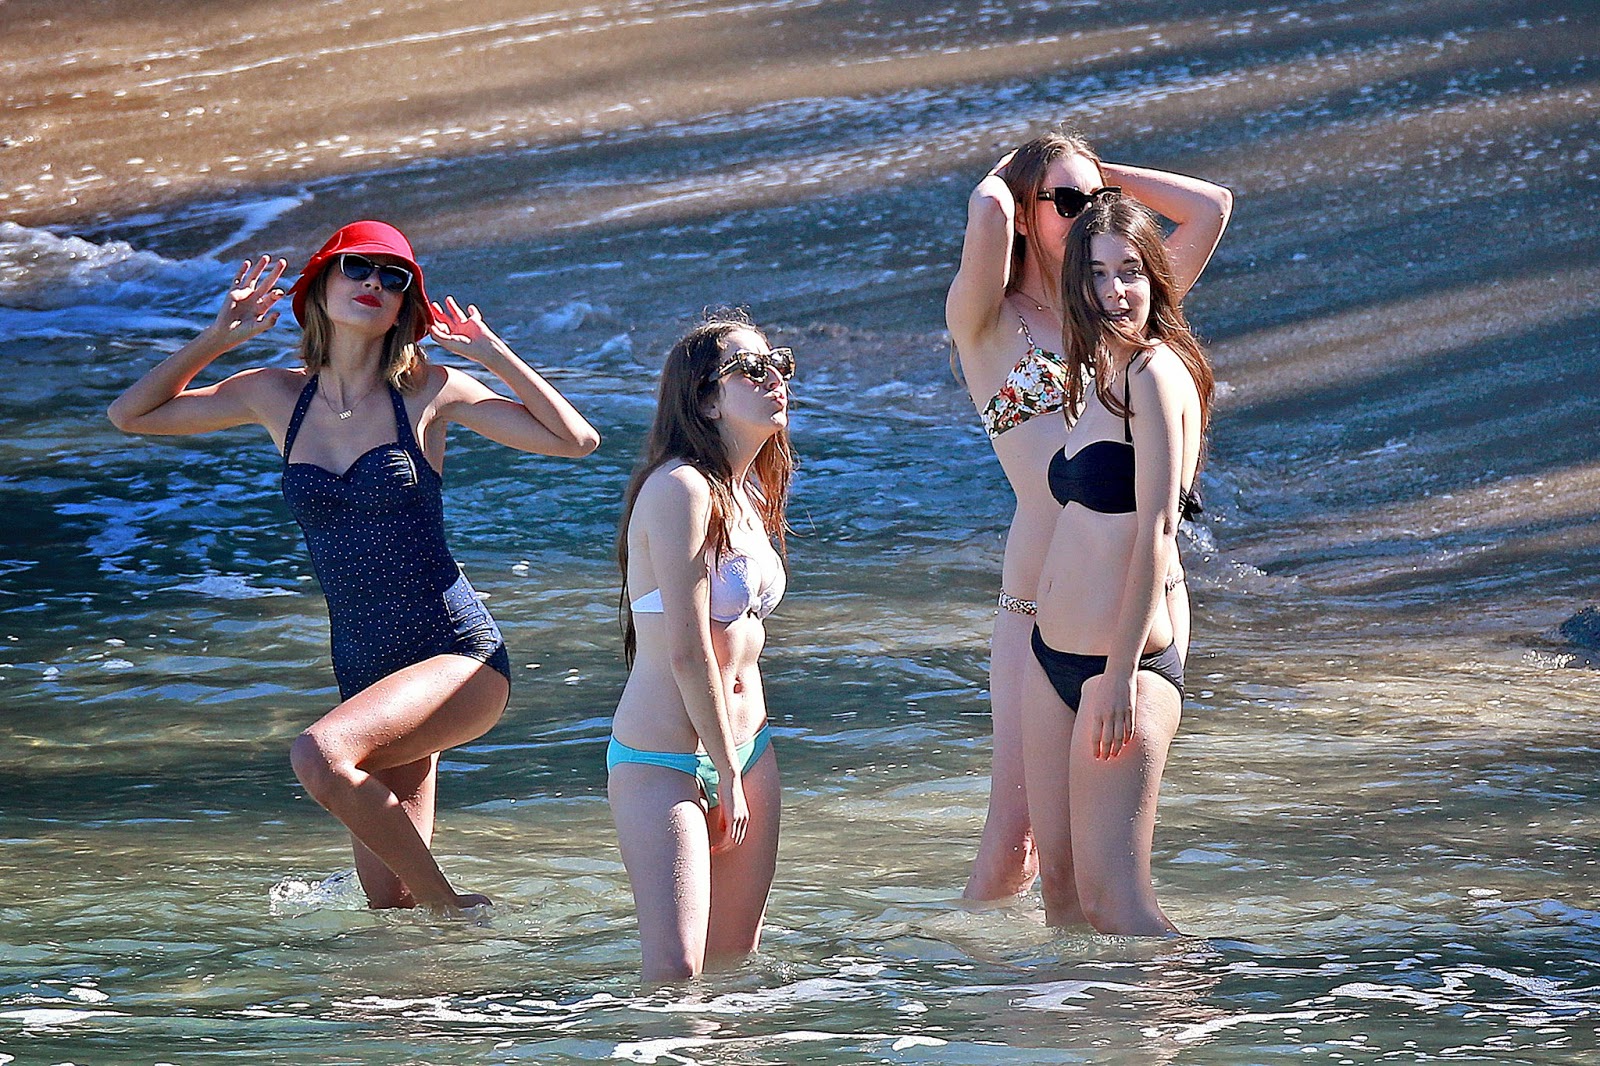 Some Sexy Swimsuit Candid Photos On A Beach In Maui.